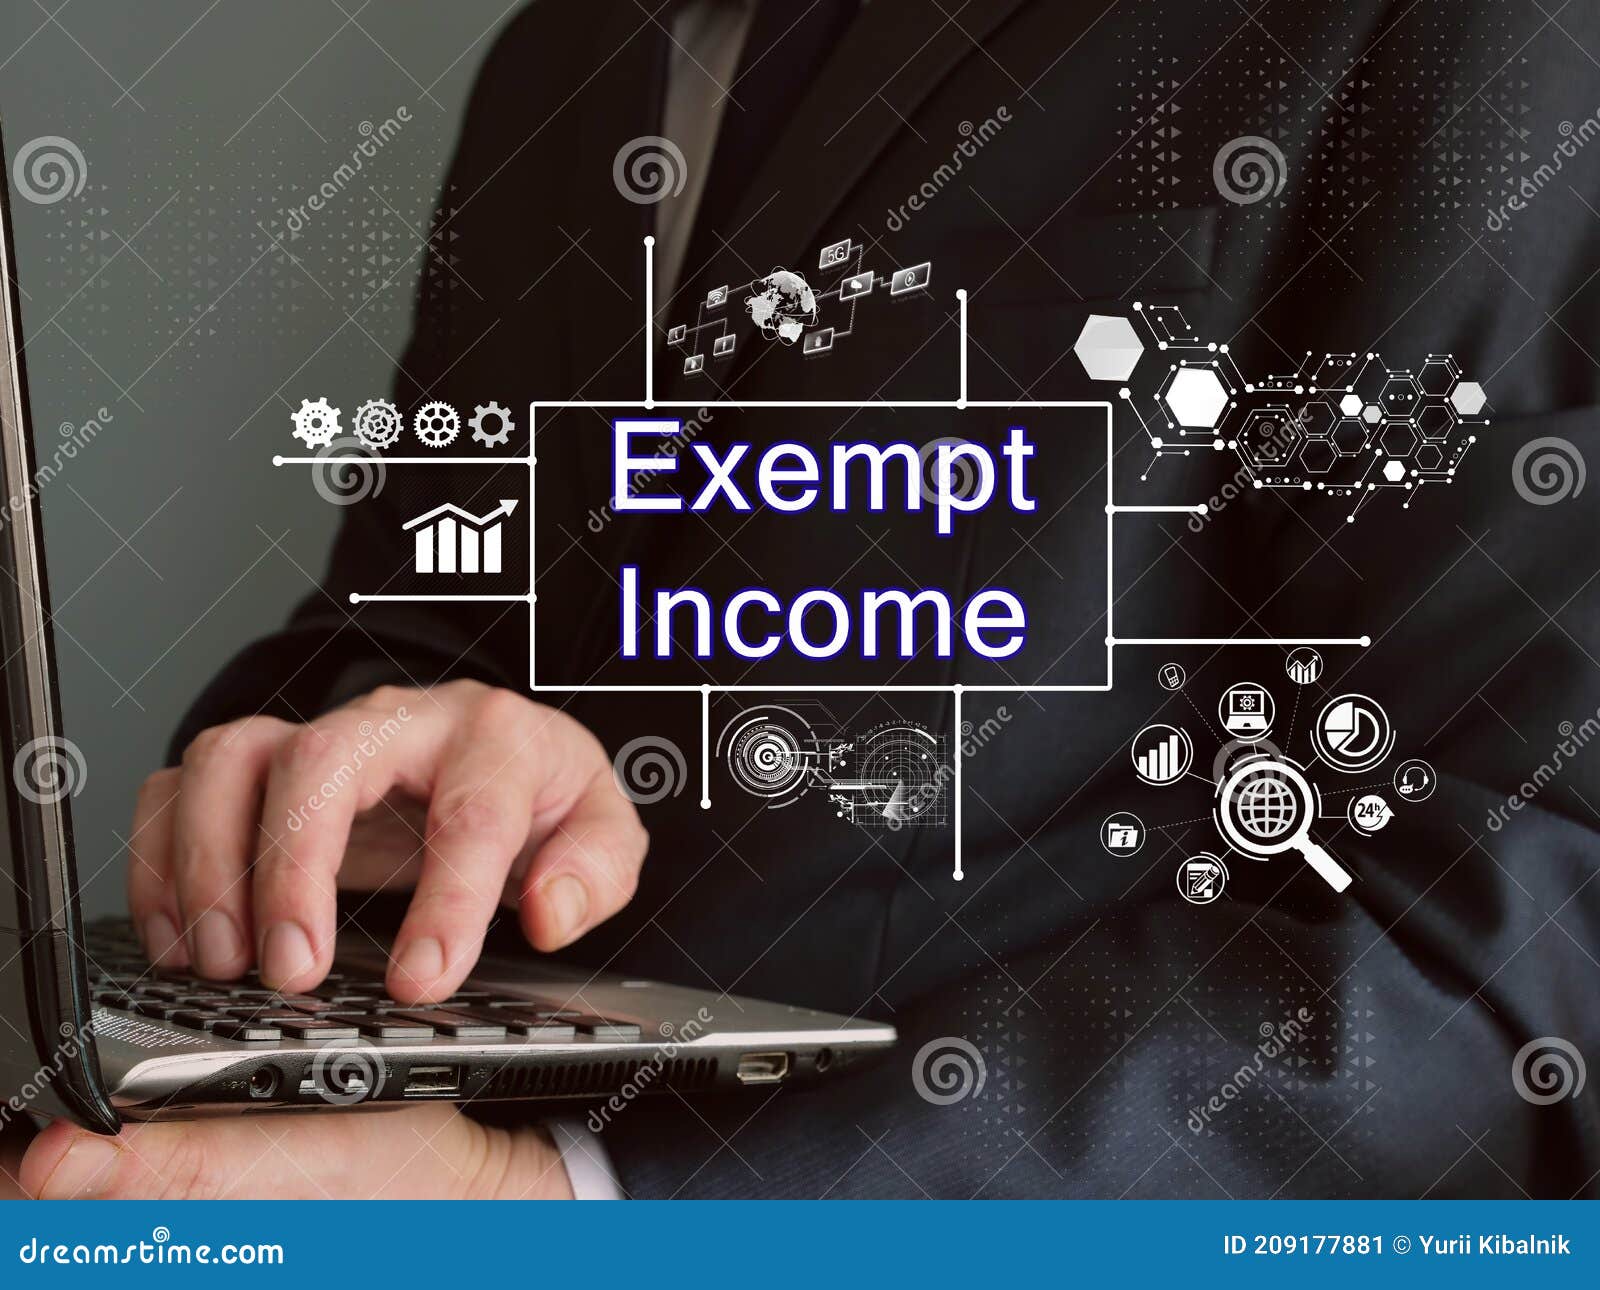 financial concept meaning exempt income with phrase on the page